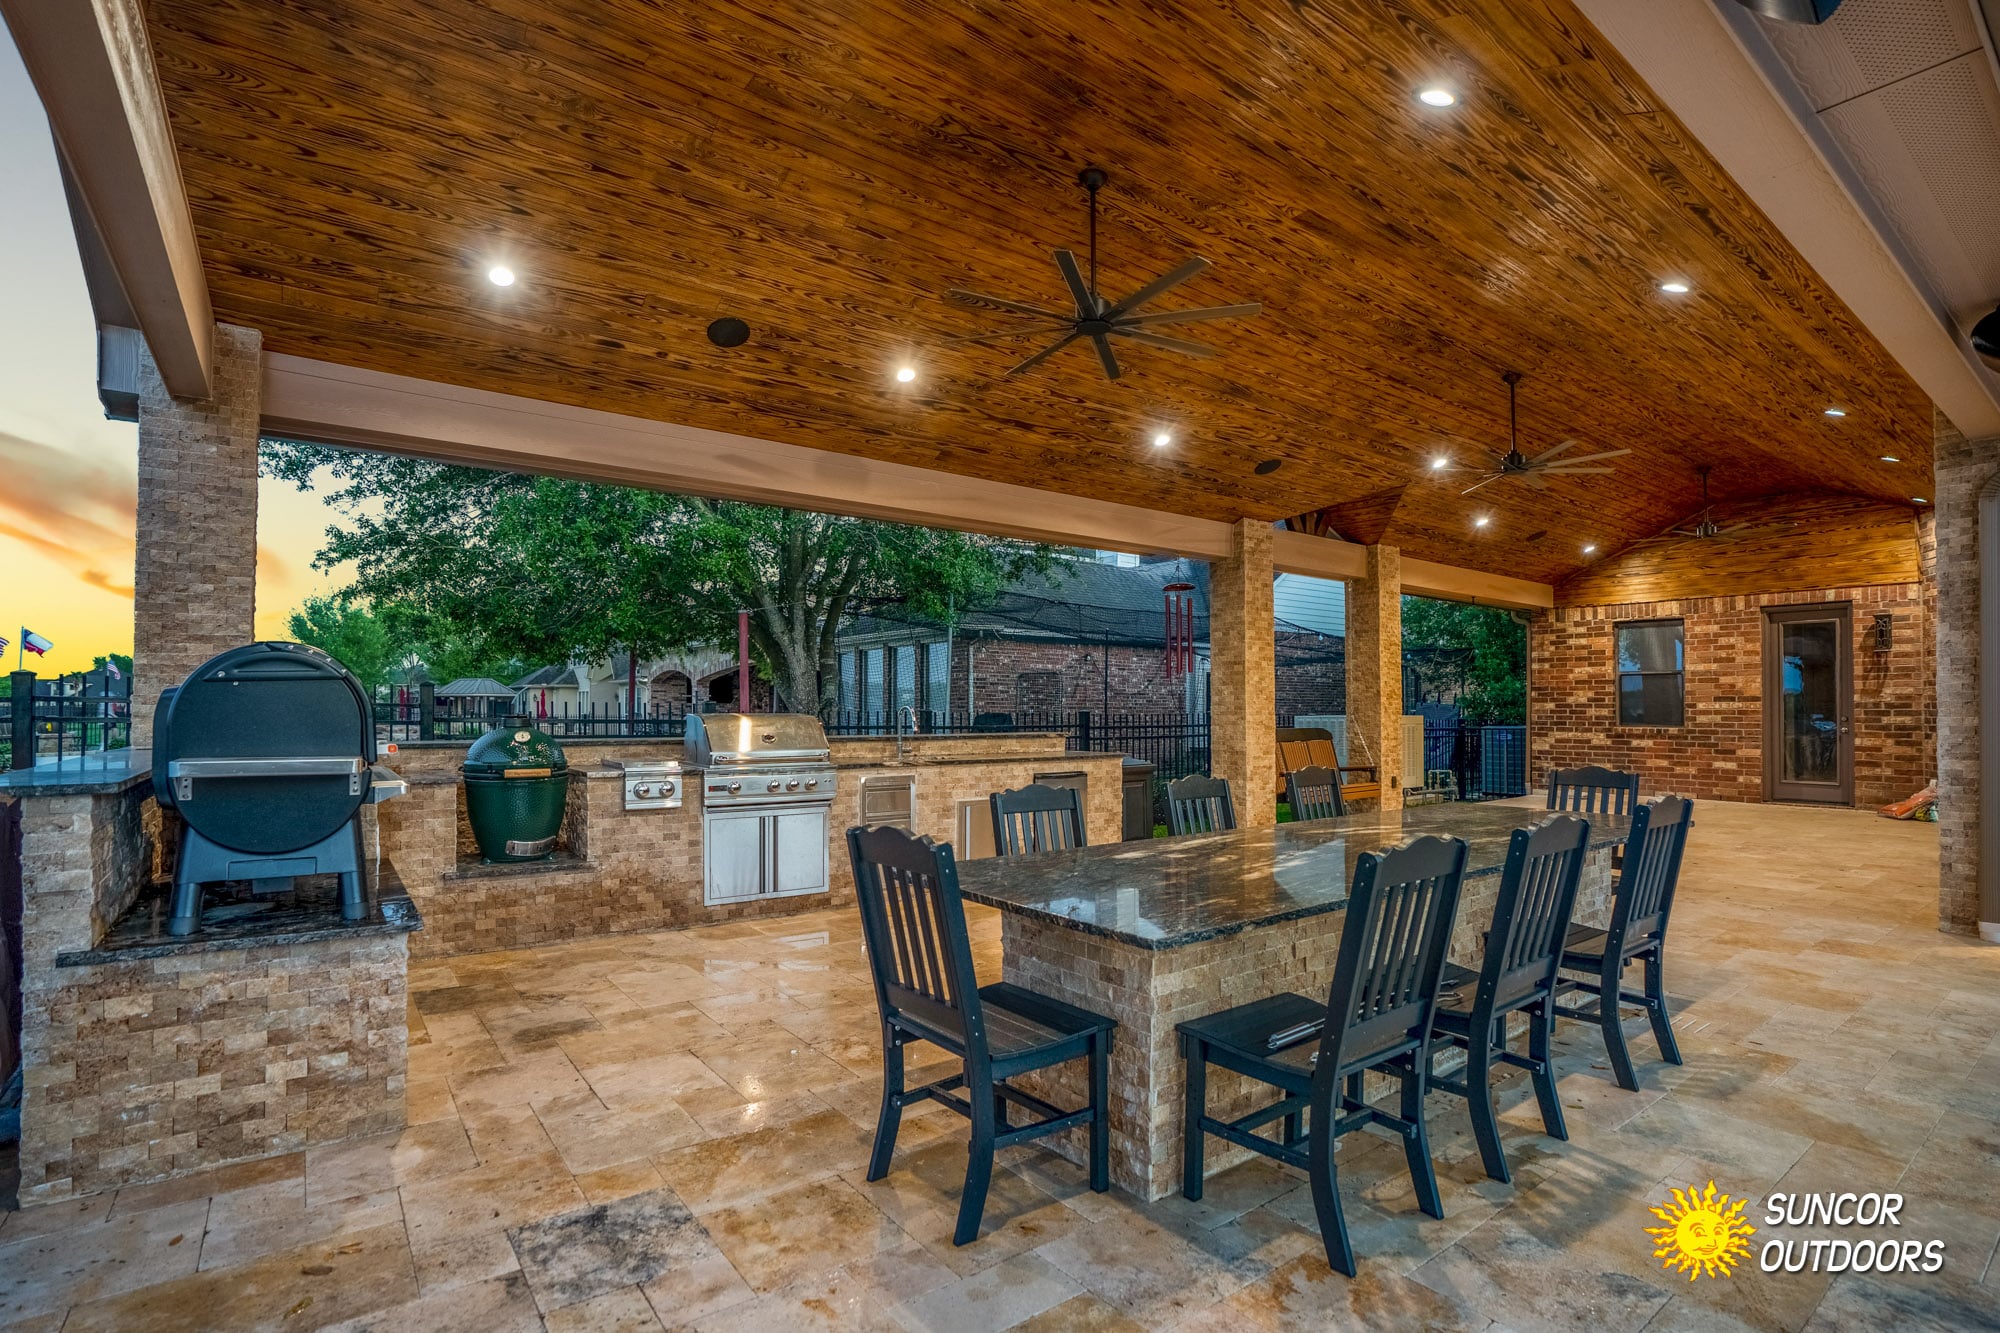 Patio Covers & Outdoor Kitchens